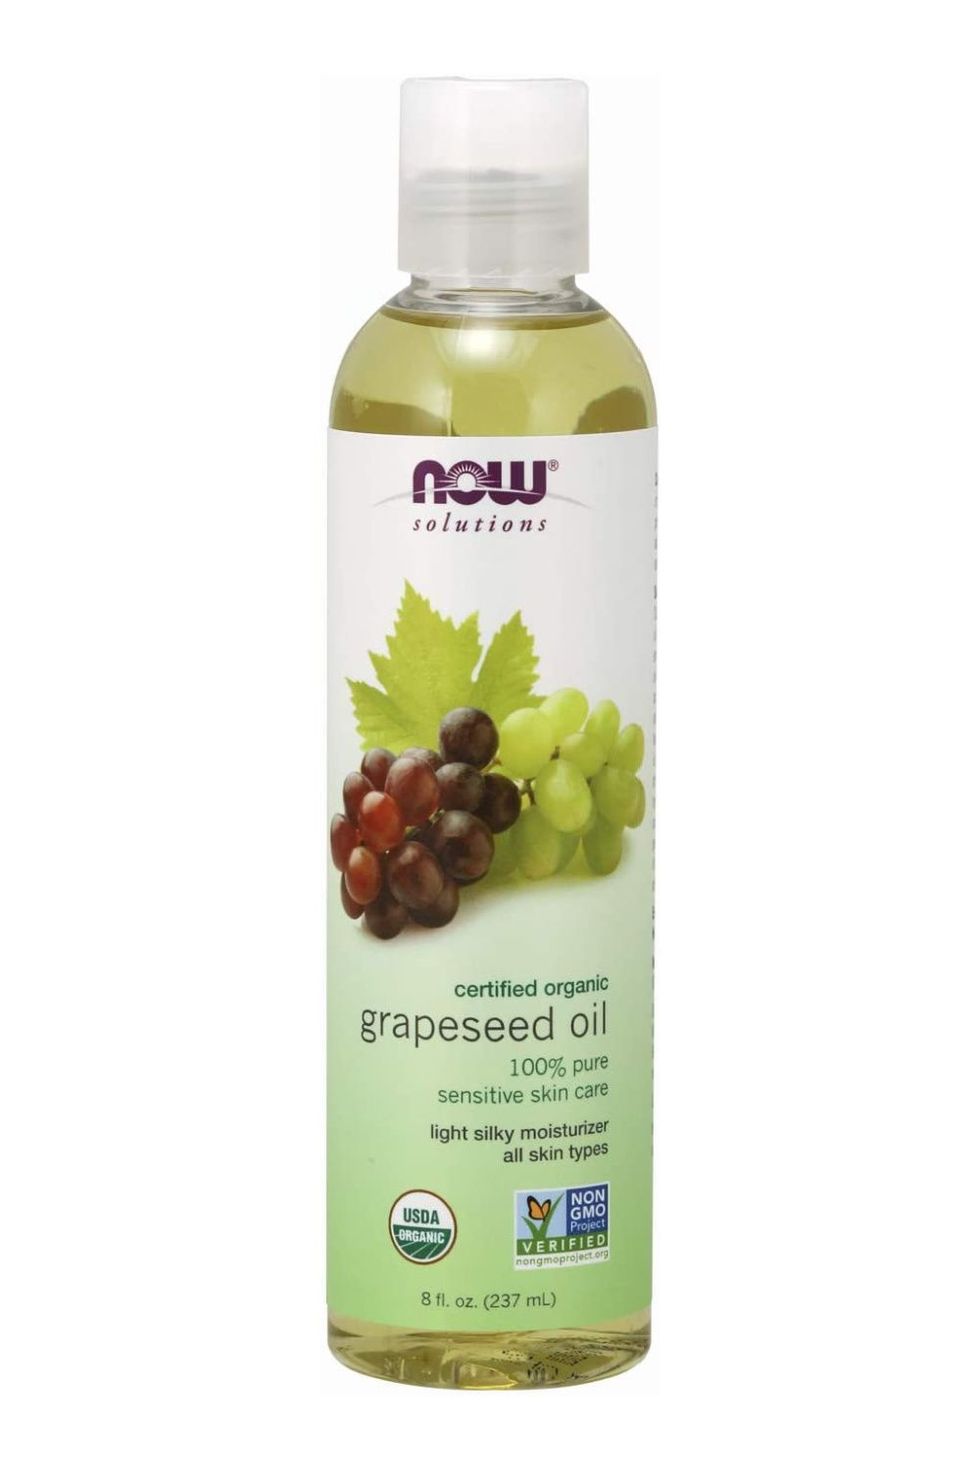 NOW Solutions Certified Organic Grapeseed Oil